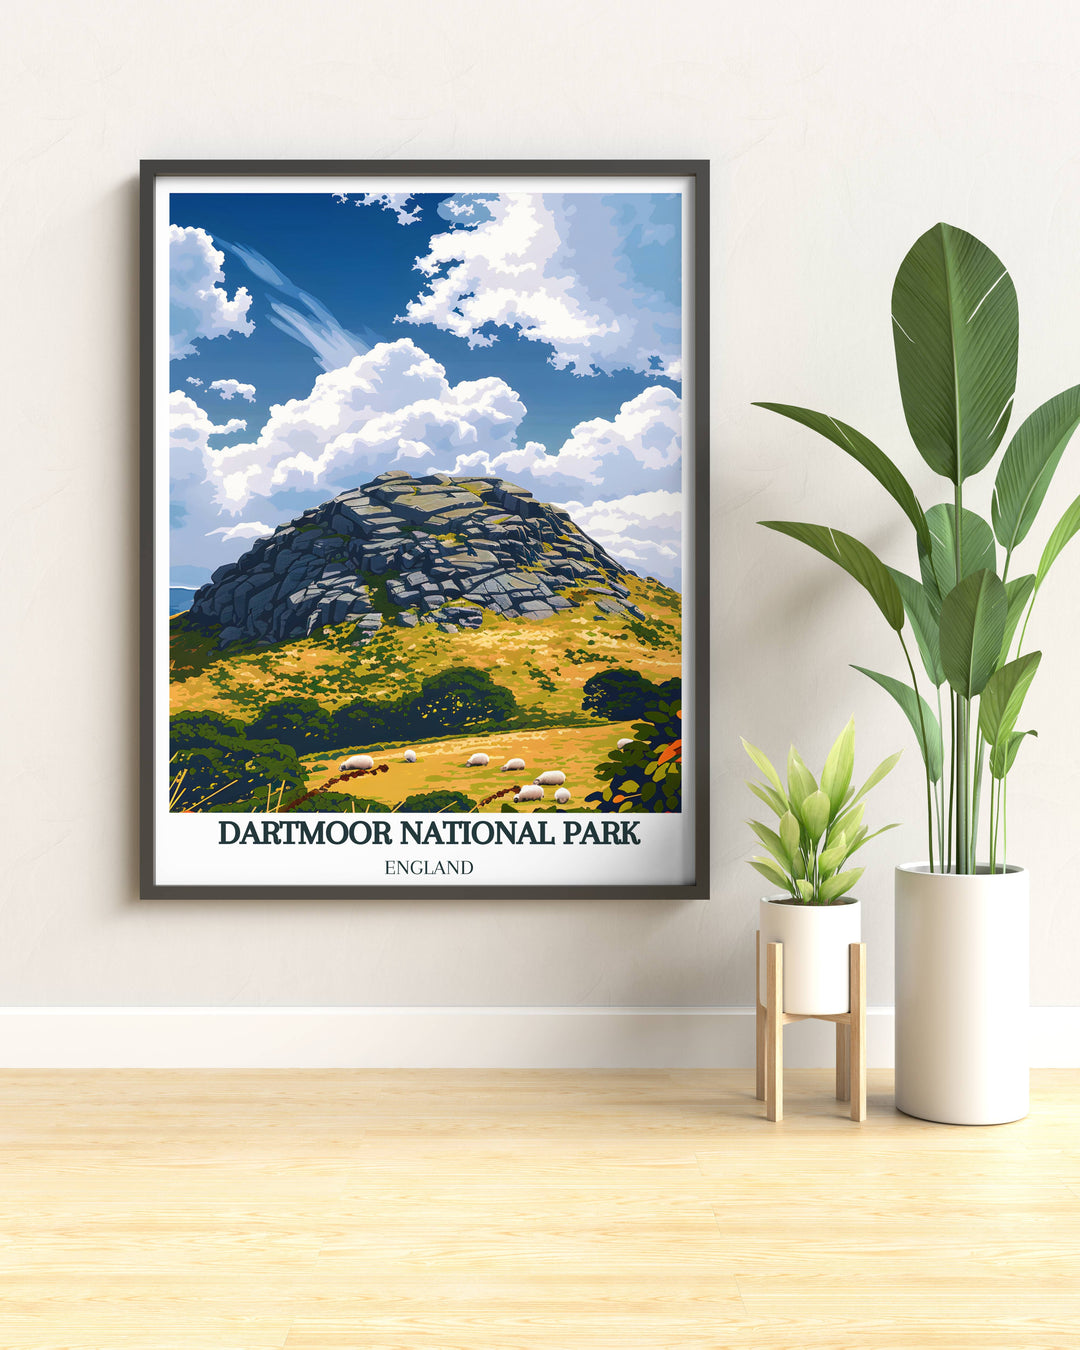 Hikers near Haytor enjoying the natural scenery perfect for inspiring outdoor enthusiasts through wall decor